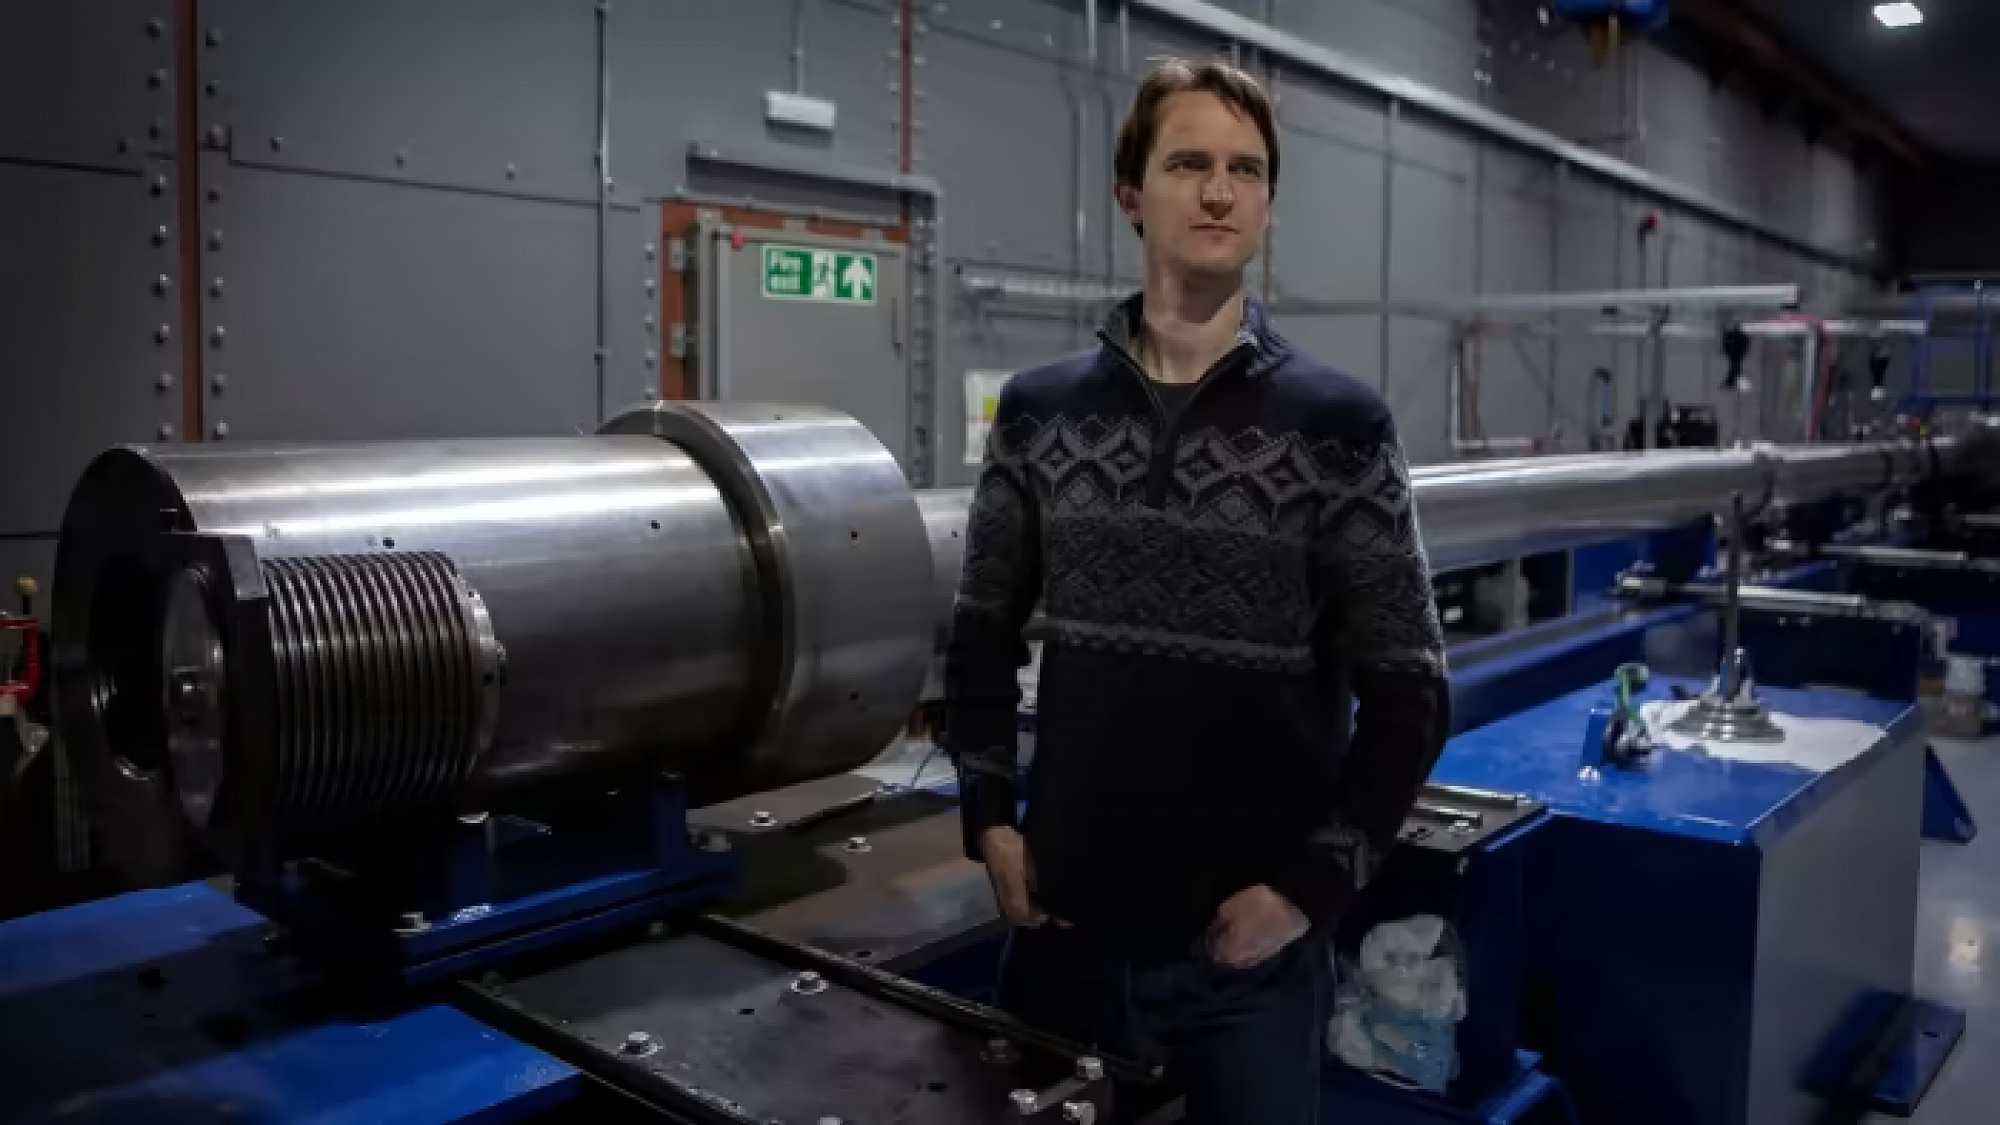 UK start-up achieves ‘projectile fusion’ breakthrough